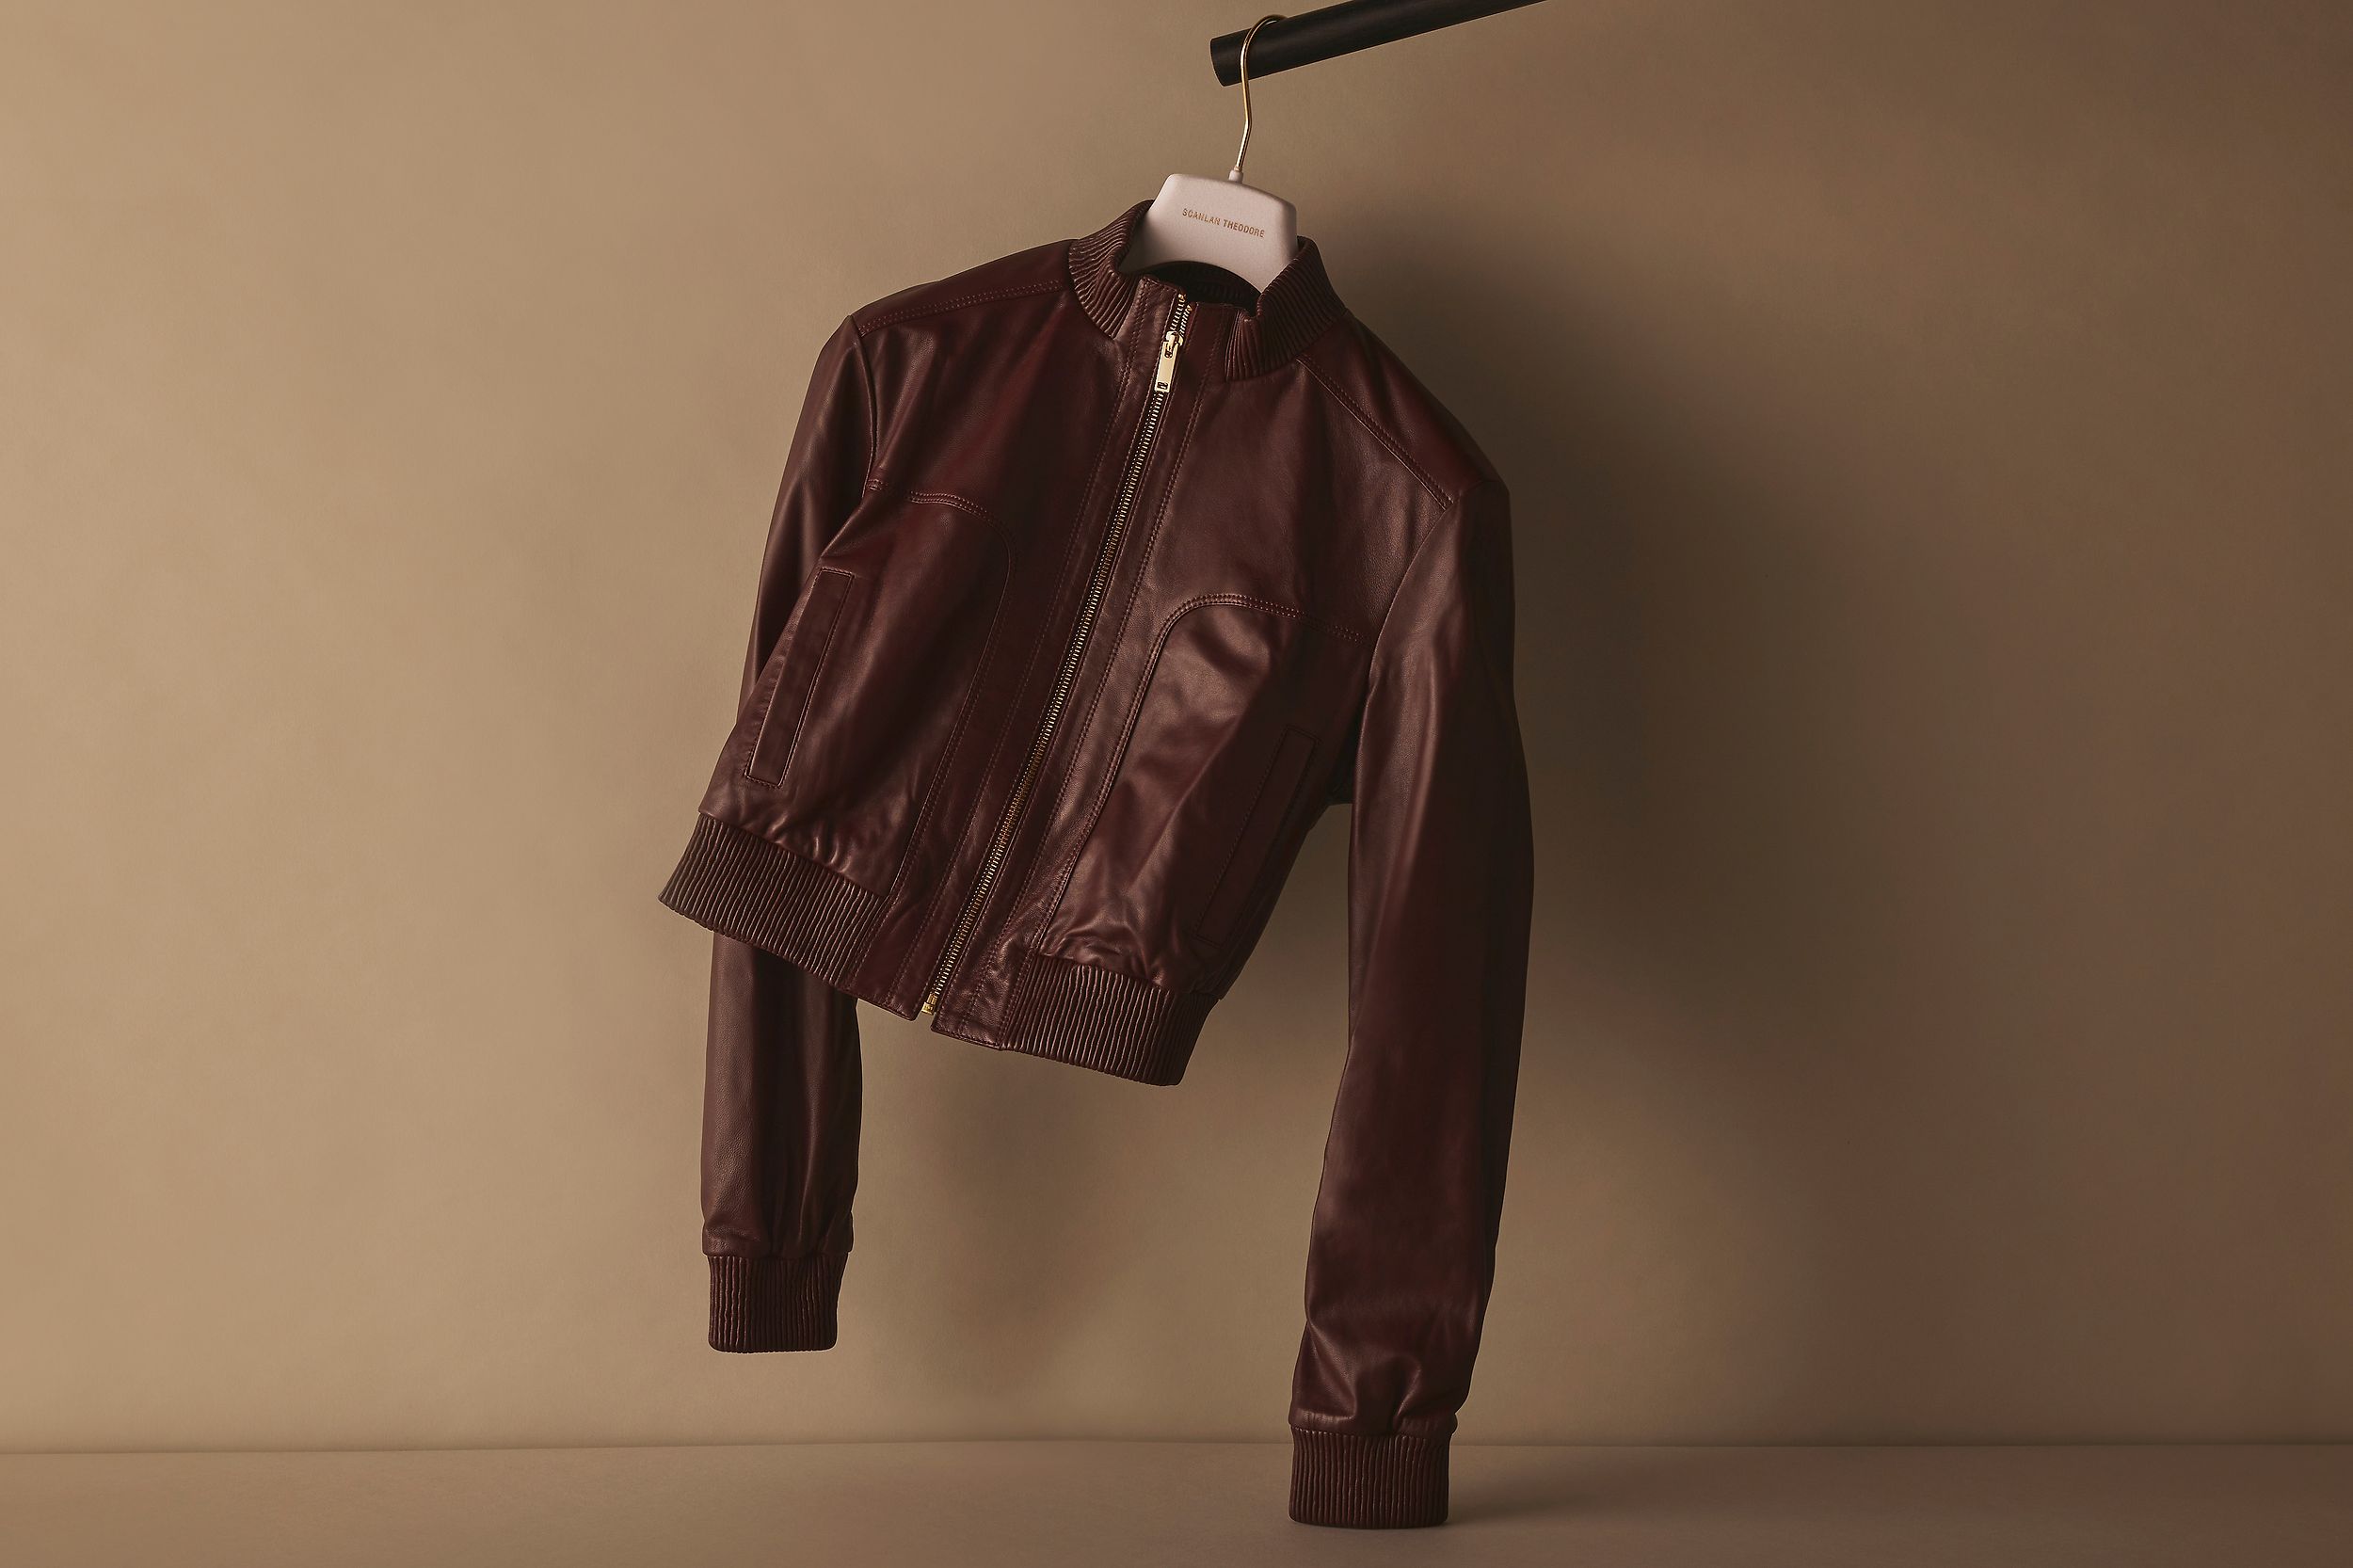 Scanlan Theodore Leather Bomber in Aubergine handing on a rail. 